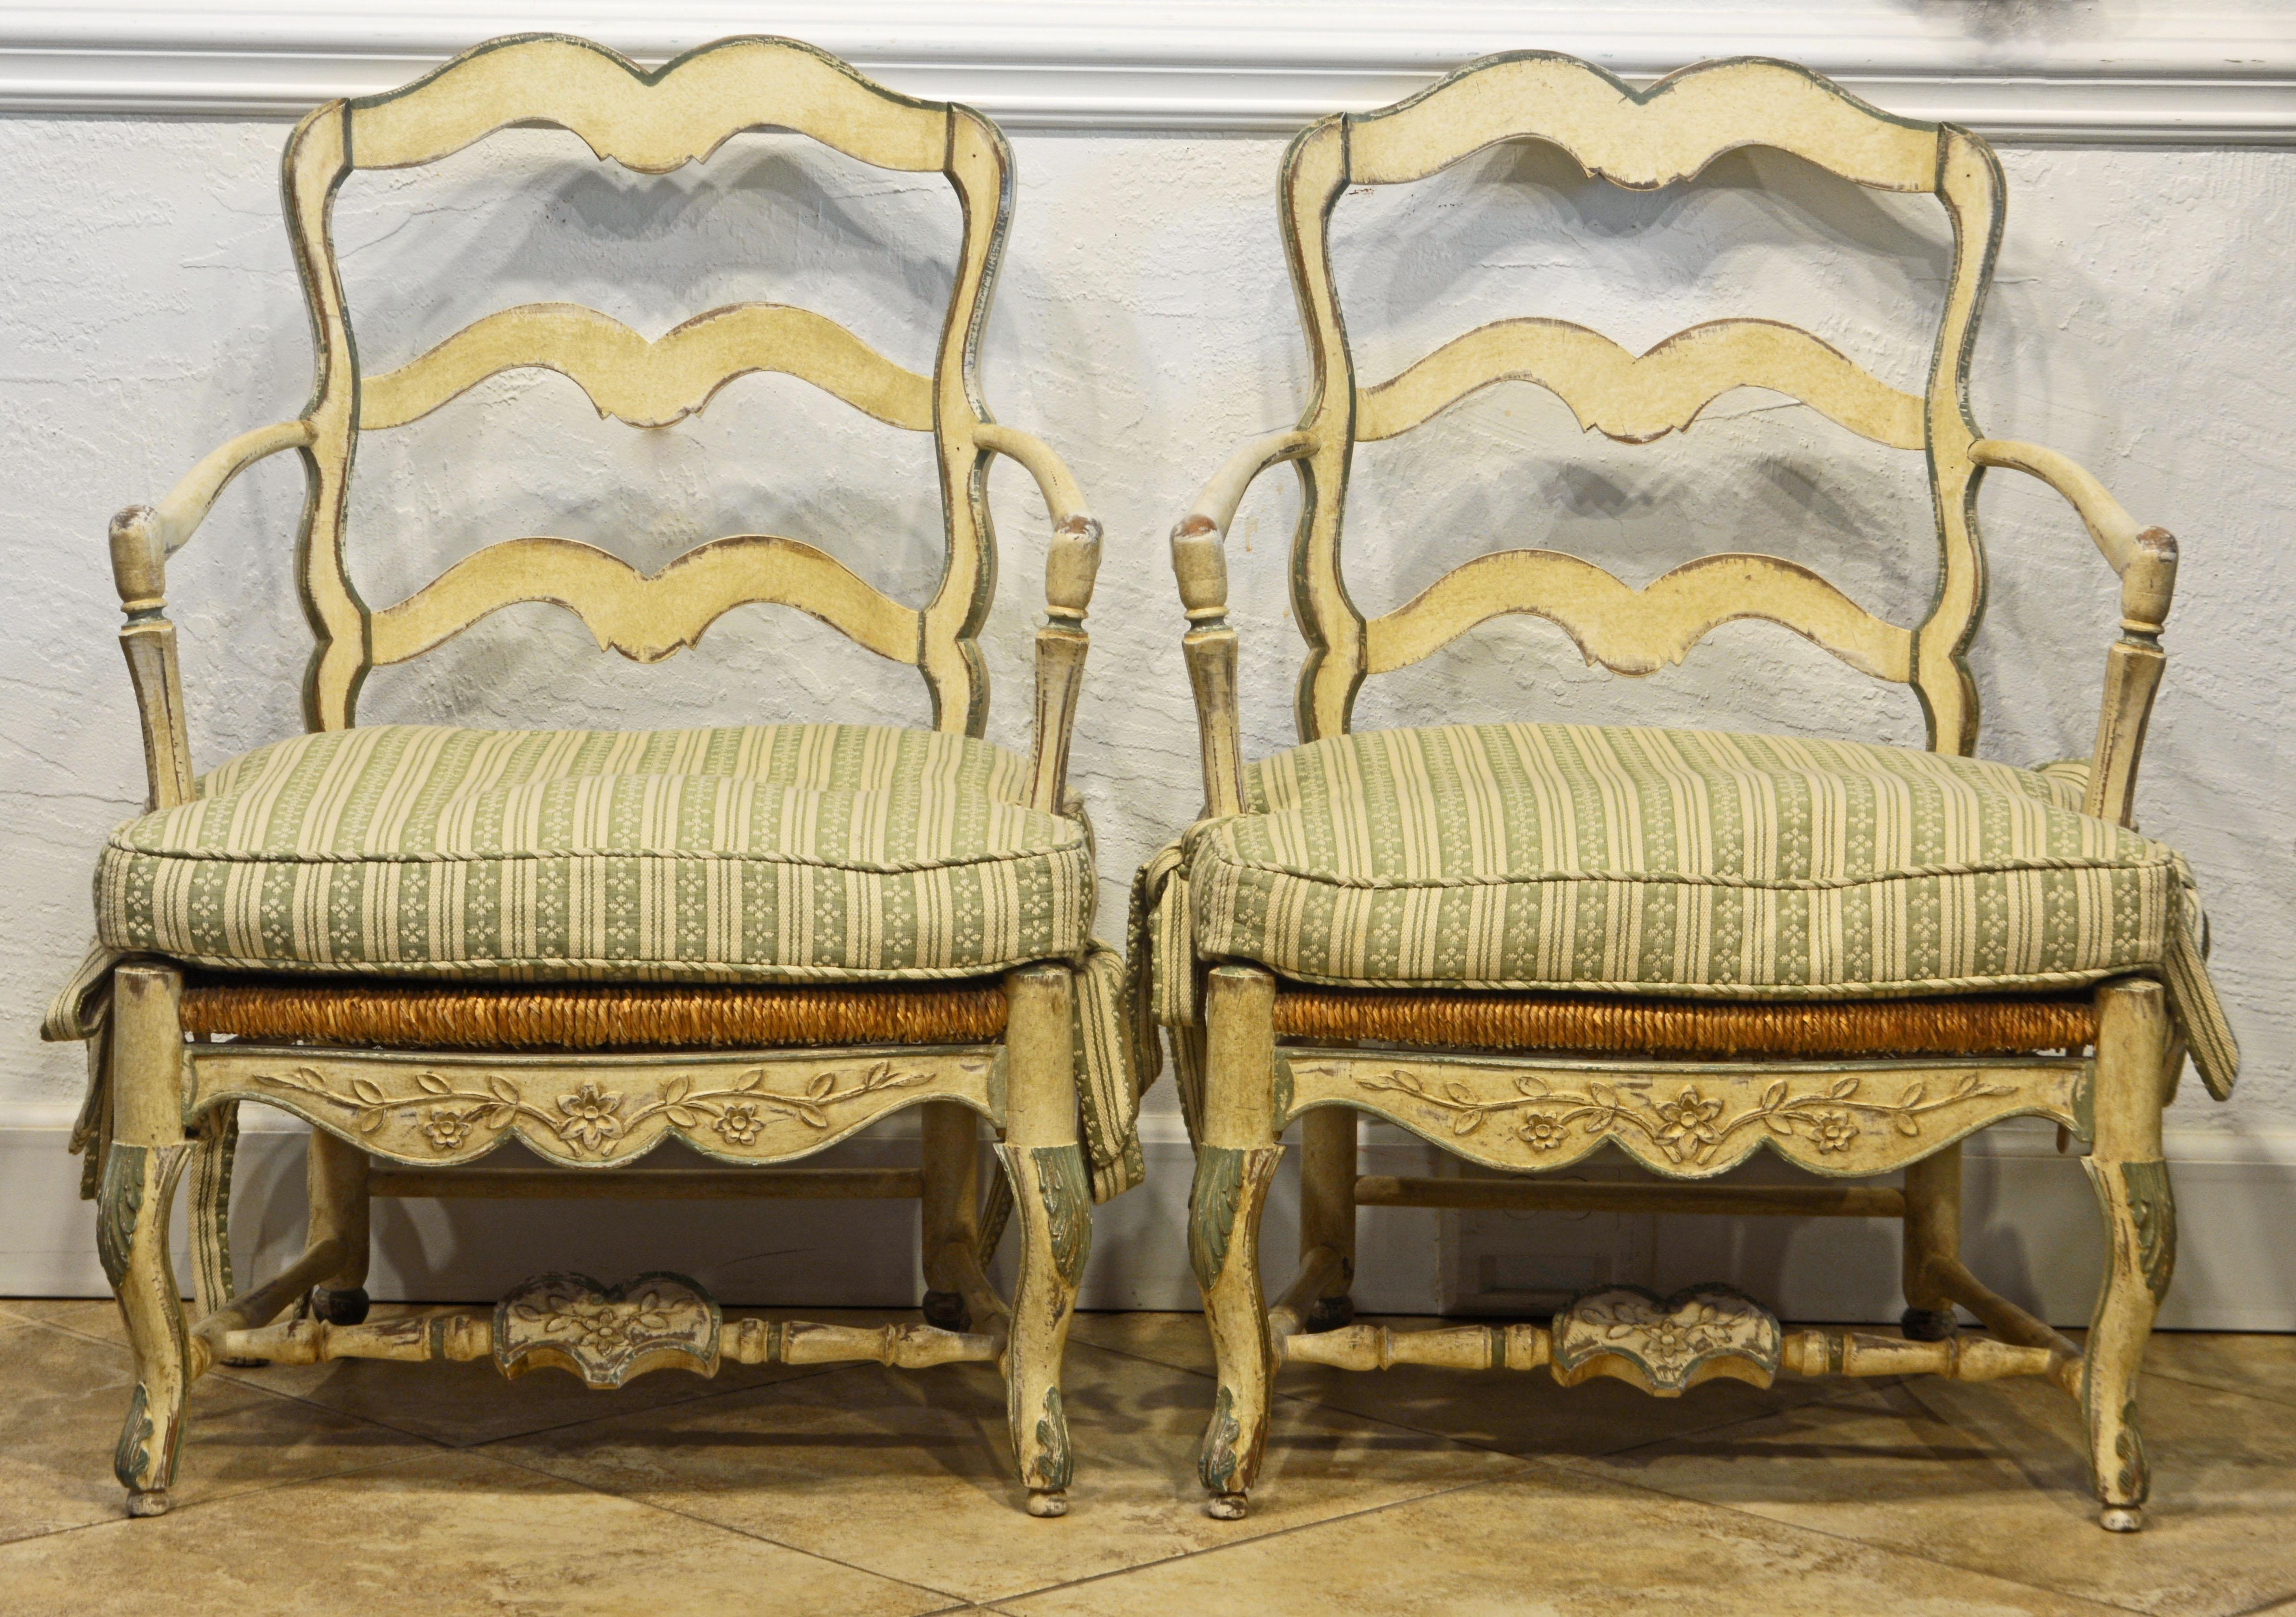 These attractive French carved bergere chairs in the Louis XV style of generous proportions feature beautifully hand carved frames painted antique white with pale green accents supporting rush seats in the French Provincial tradition. The surfaces